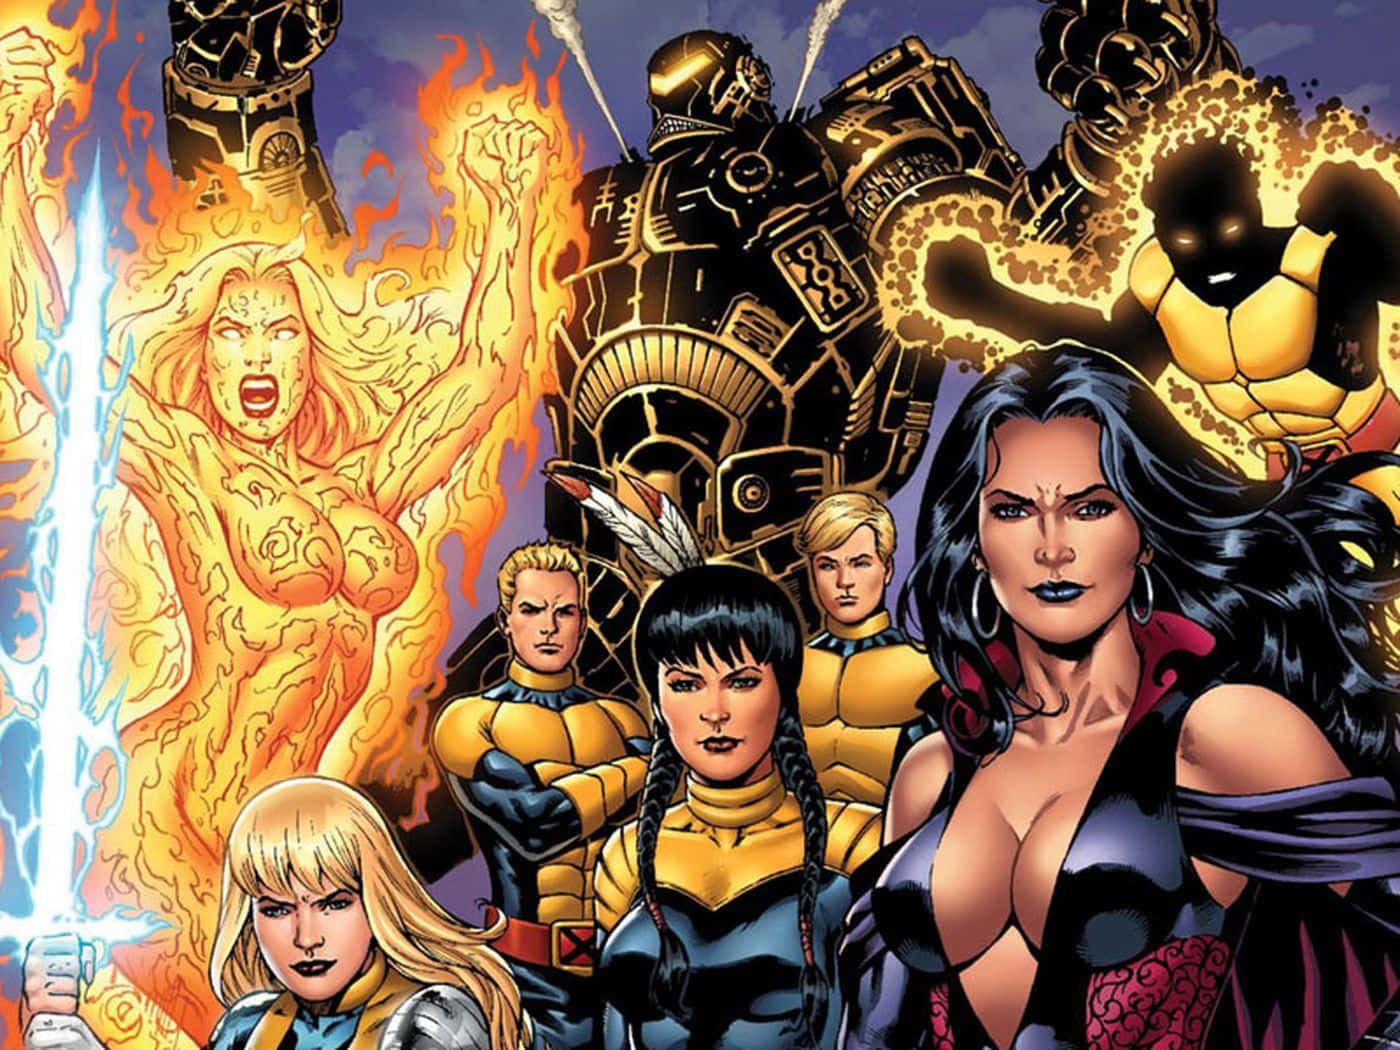 Team of New Mutants showcasing their powers in action Wallpaper